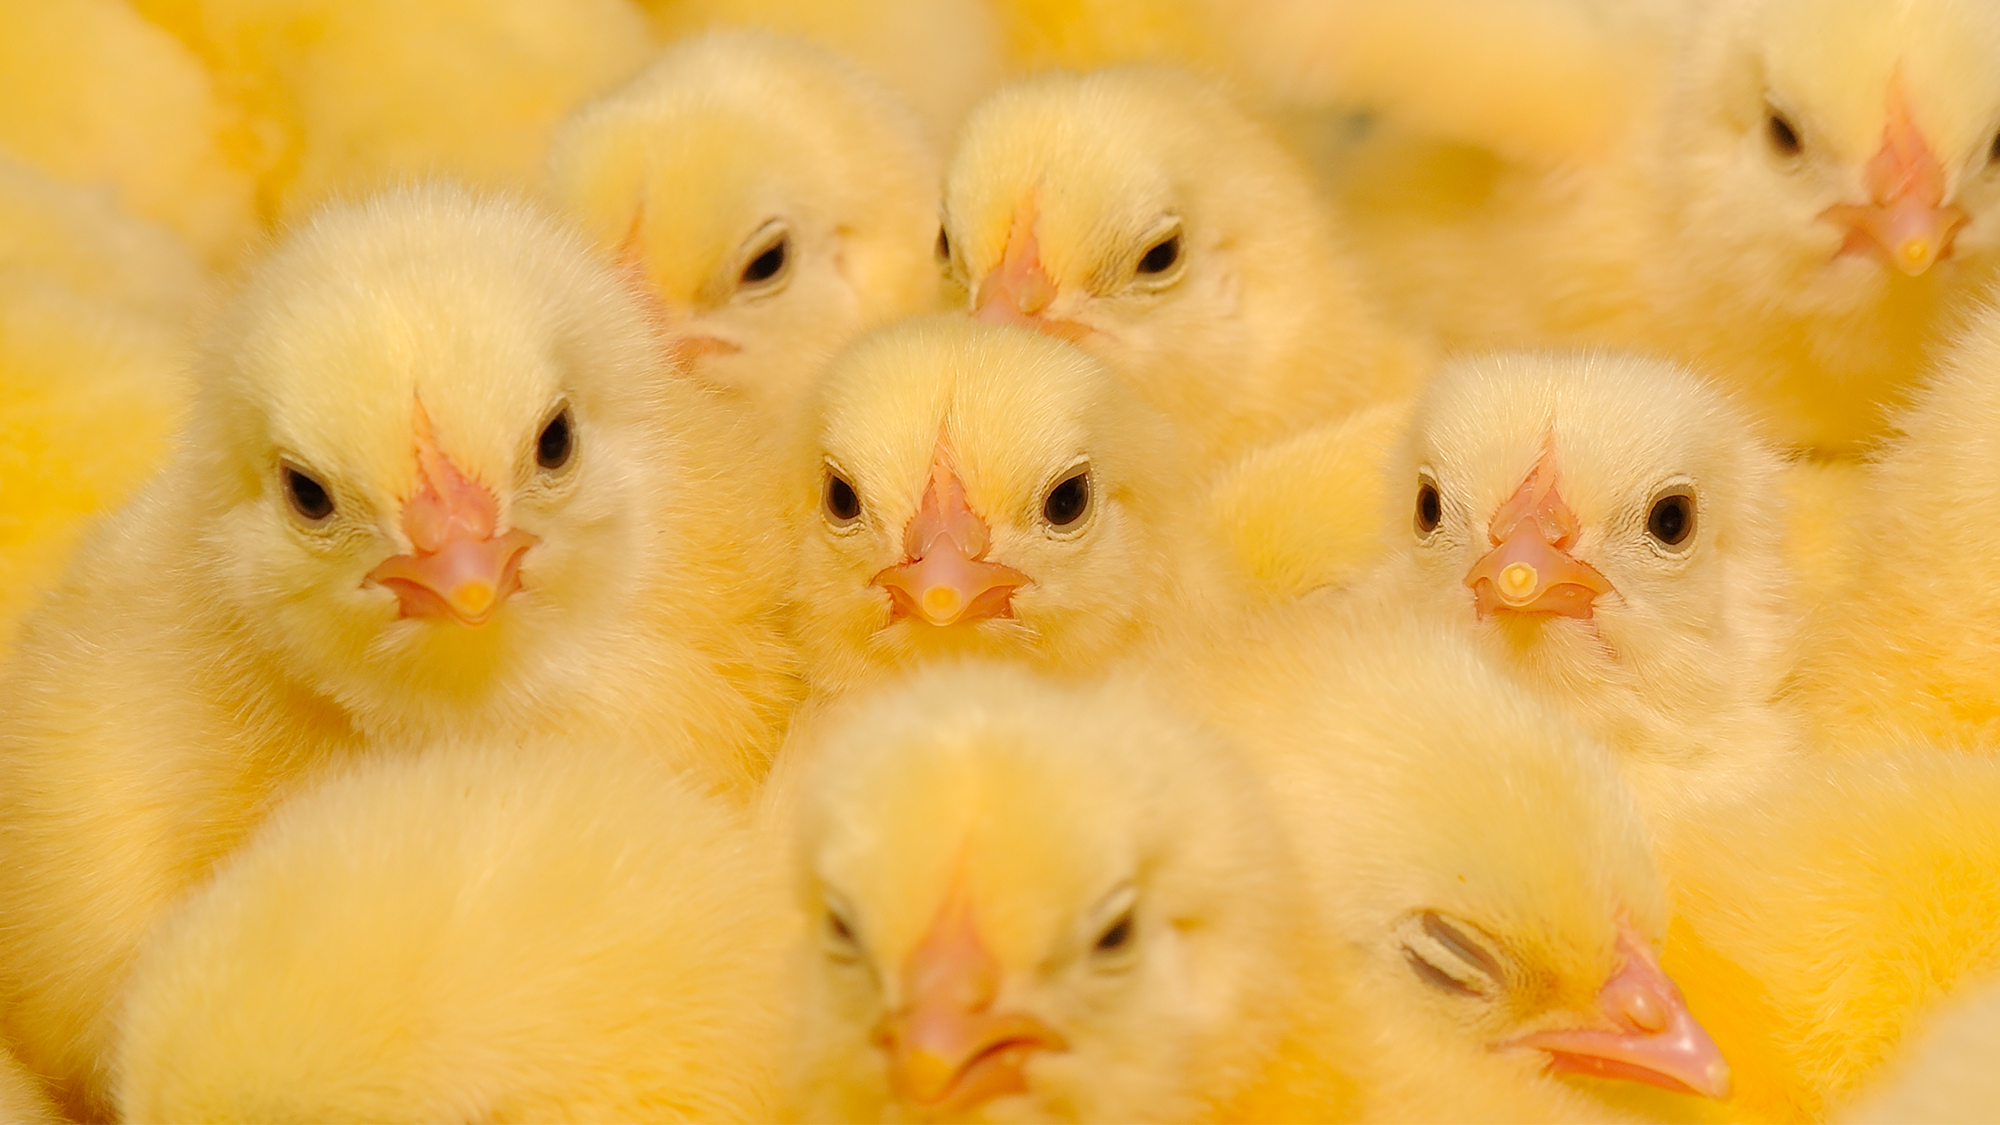 A group of yellow and fuzzy baby chicks.